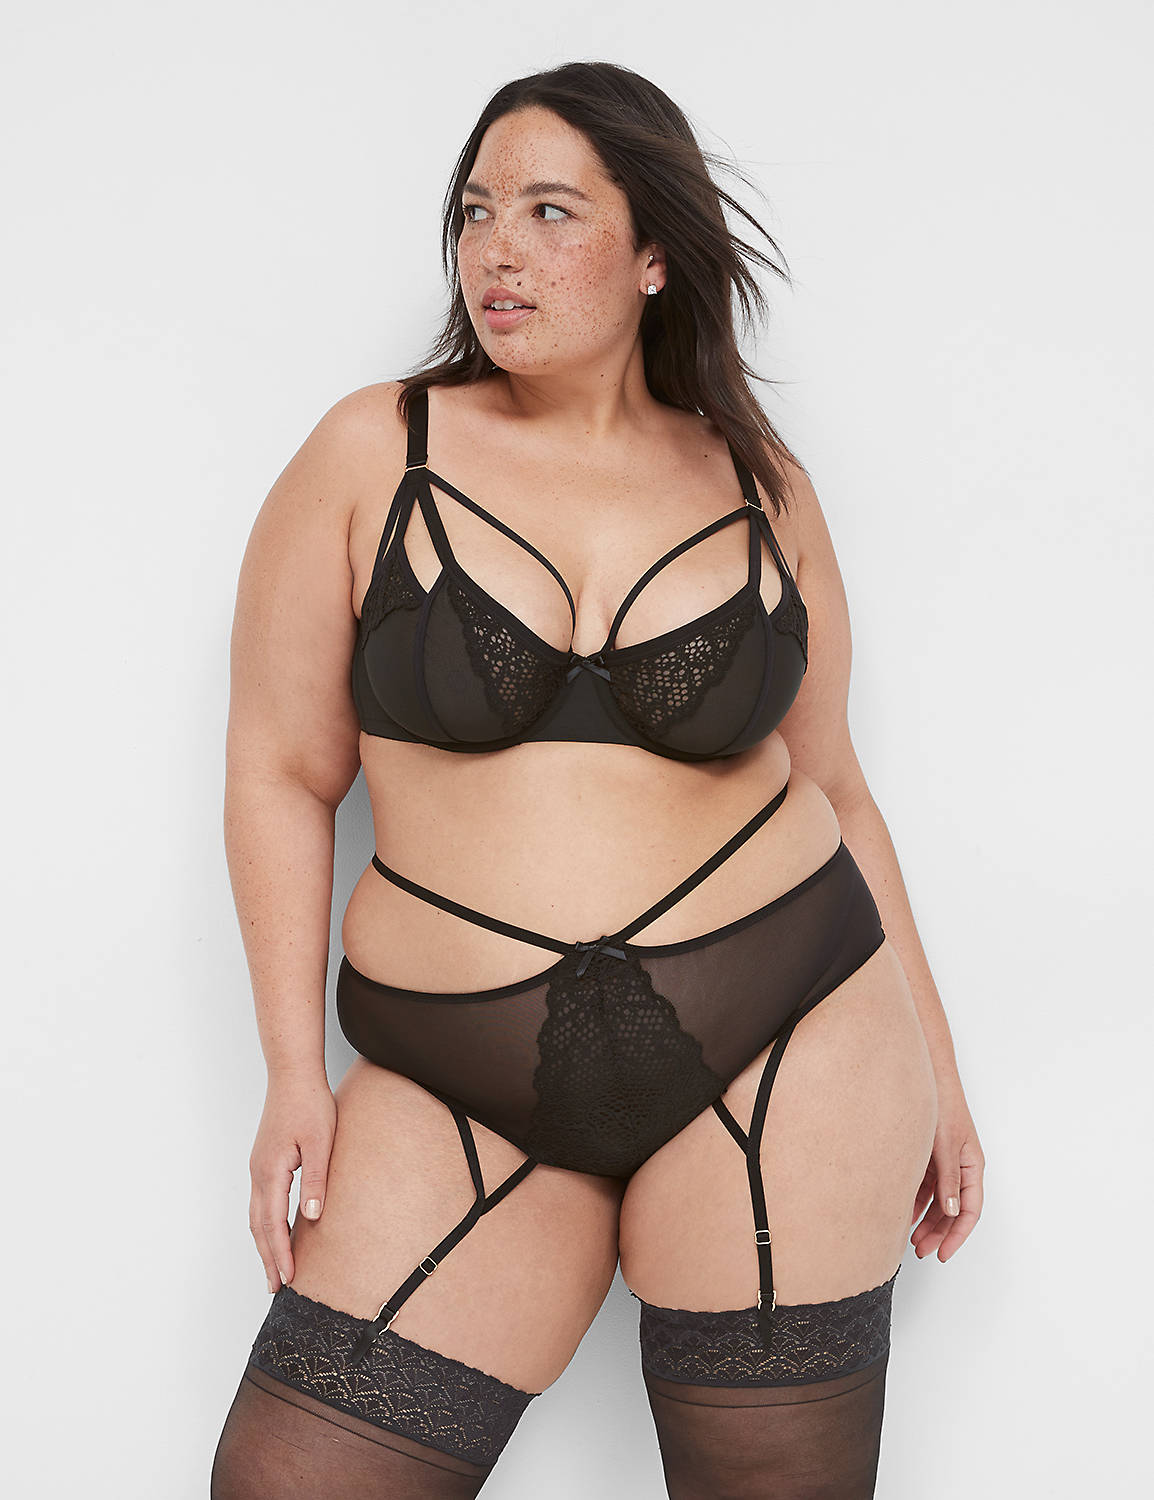 Unlined Caged Lace Balconette 11354 Product Image 1